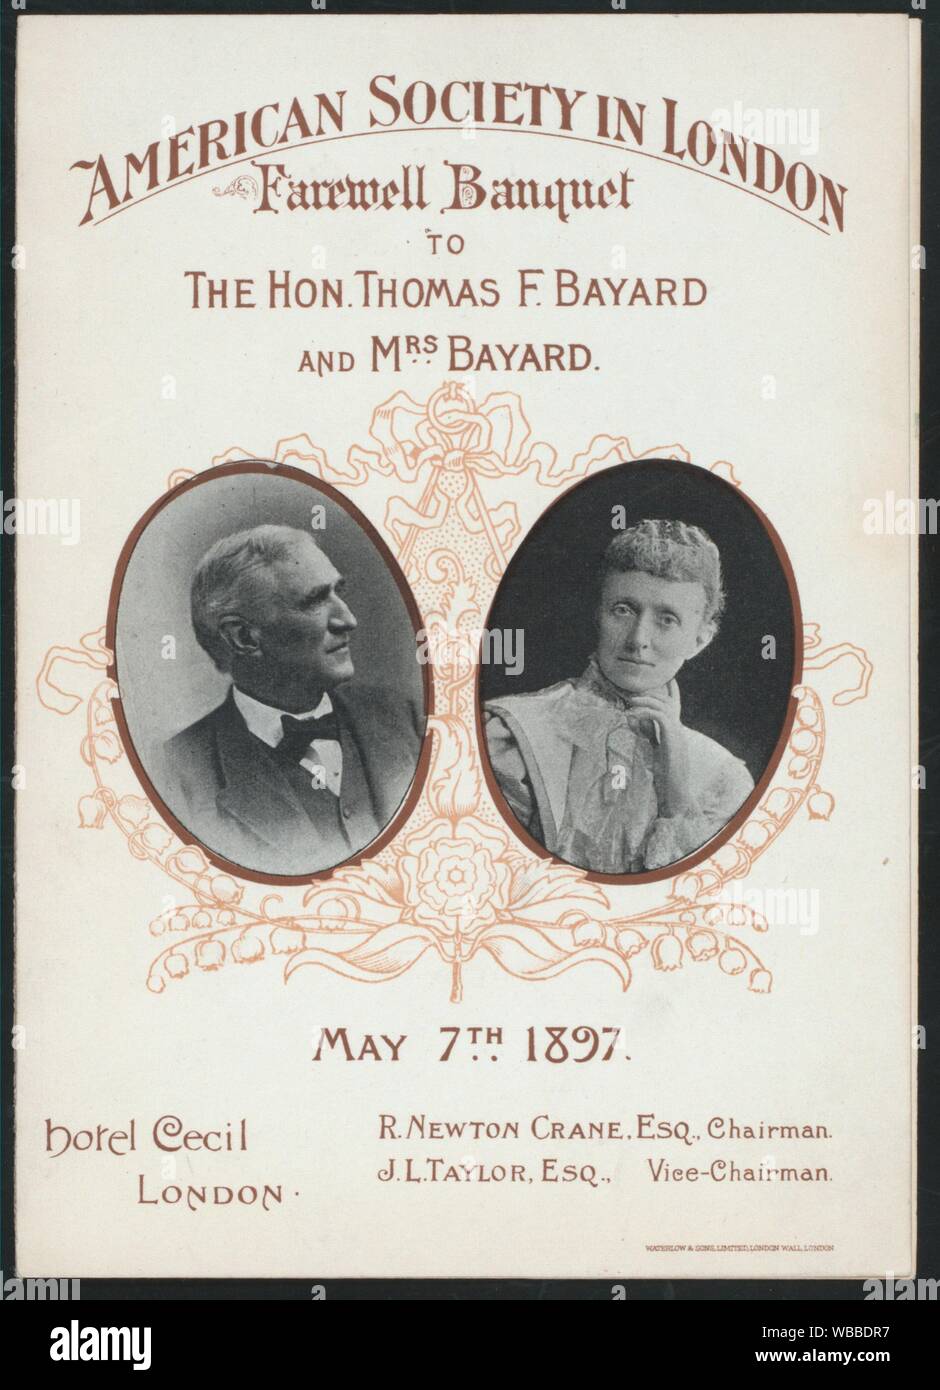 FAREWELL BANQUET TO HON. THOMAS F. BAYARD AND MRS. BAYARD [held by] AMERICAN SOCIETY IN LONDON [at] ''HOTEL CECIL, LONDON, ENGLAND'' (FOR;). Stock Photo